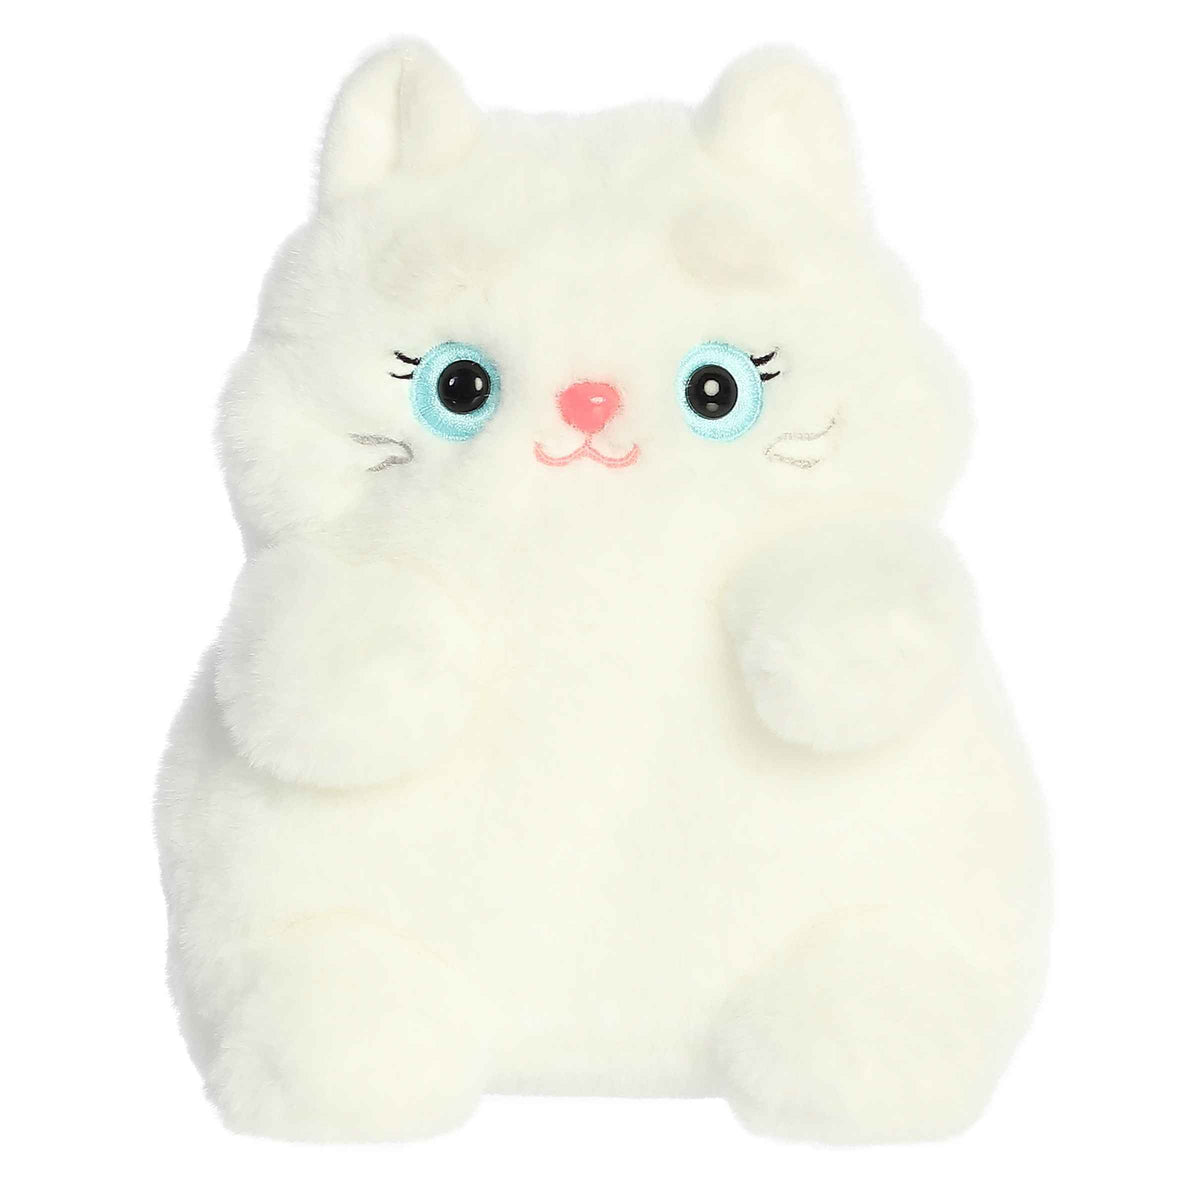 Angel plush from MewMews, pristine white with blue eyes, heartwarming expression, comes with personality booklet and sticker